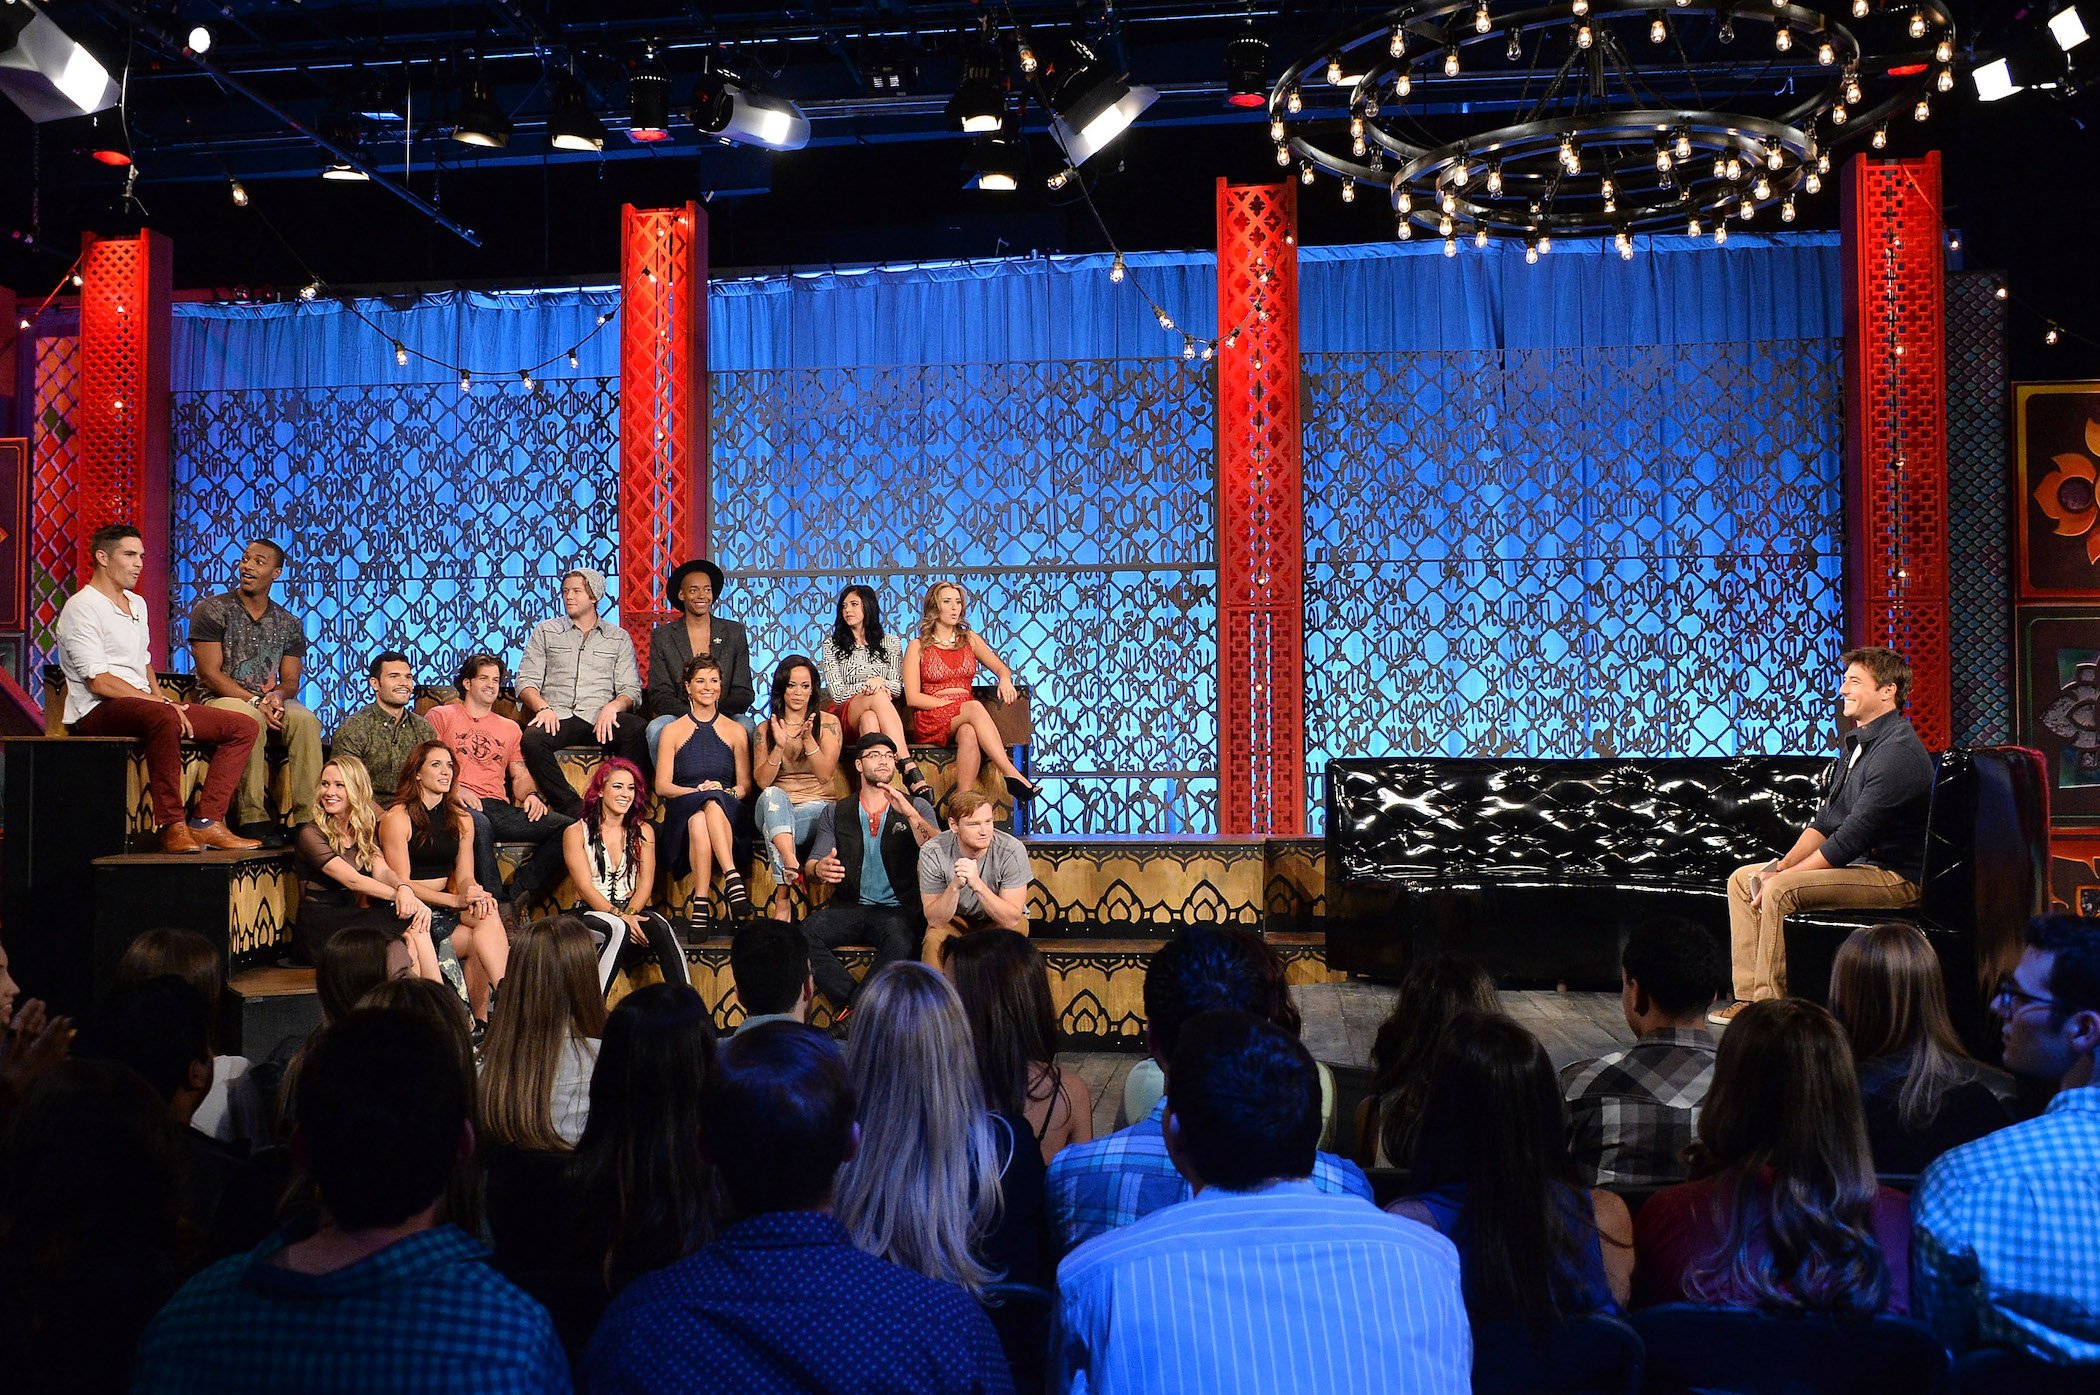 A distant photo of the cast from 'The Challenge' sitting together at MTV's 'The Challenge: Rivals II' final episode and reunion party